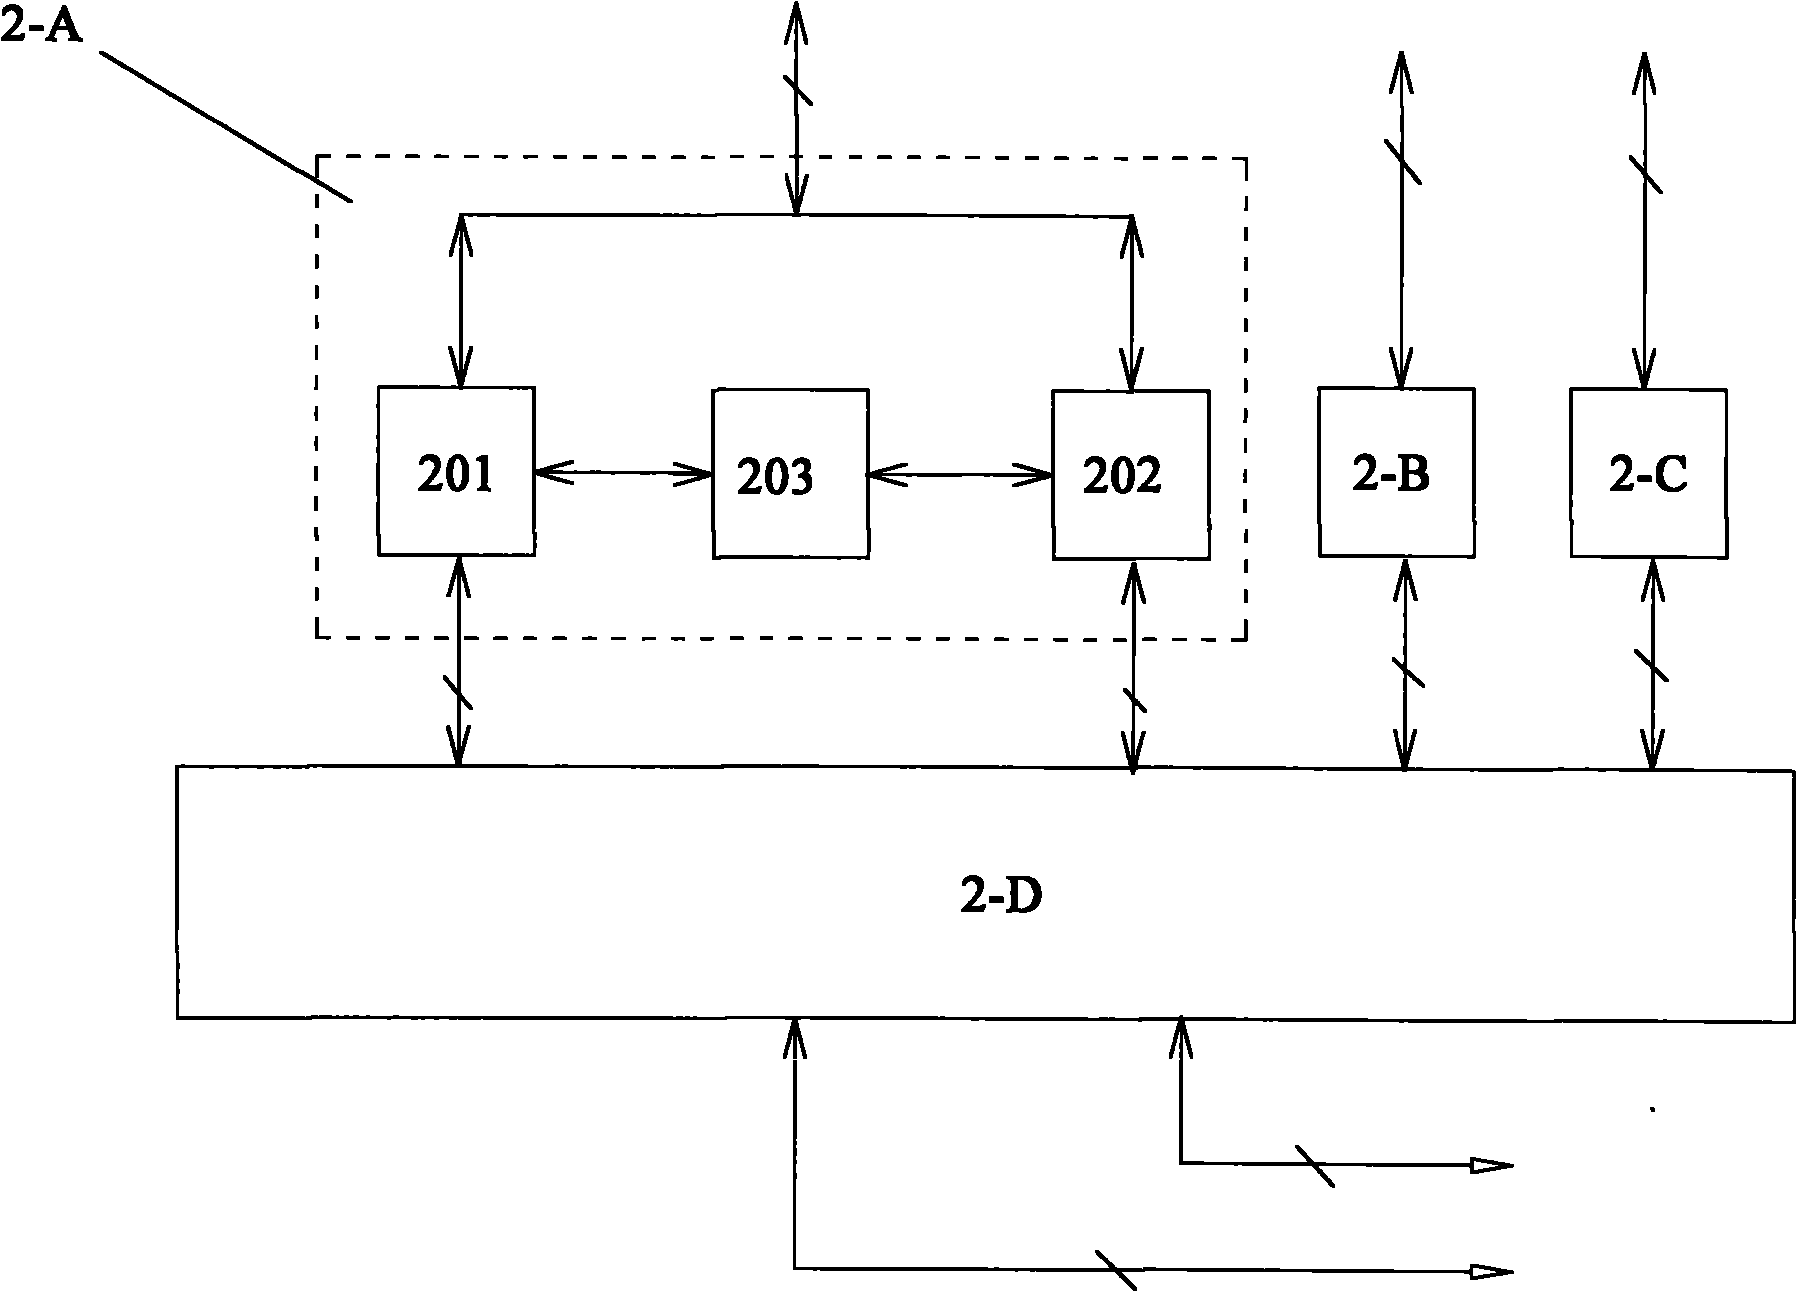 Image icing detector